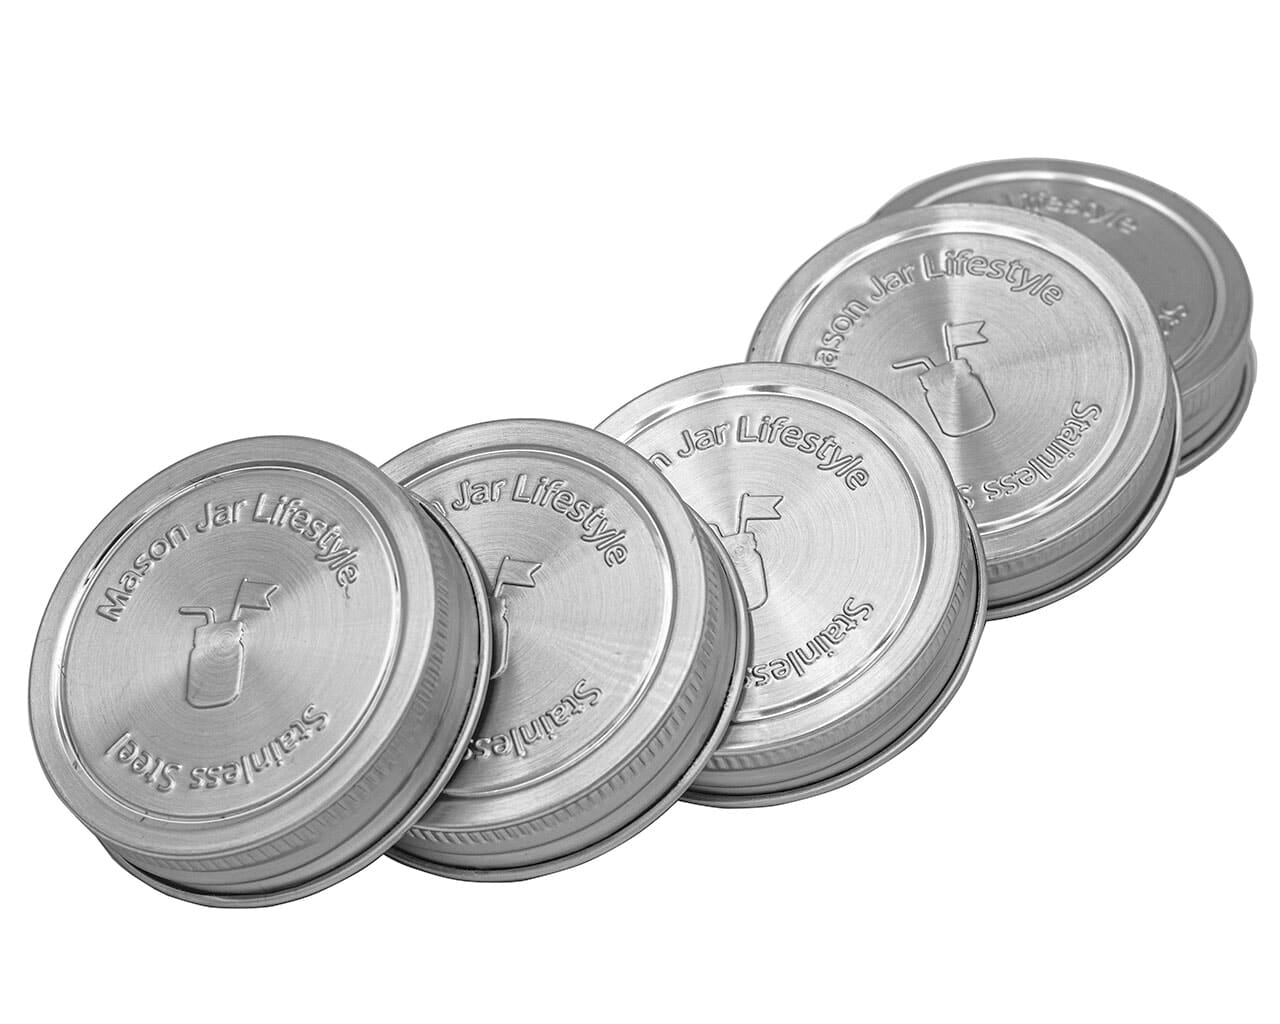 Stainless Steel Storage Lids Caps with Silicone Seals for Mason Jars (5 Pack, Regular Mouth)